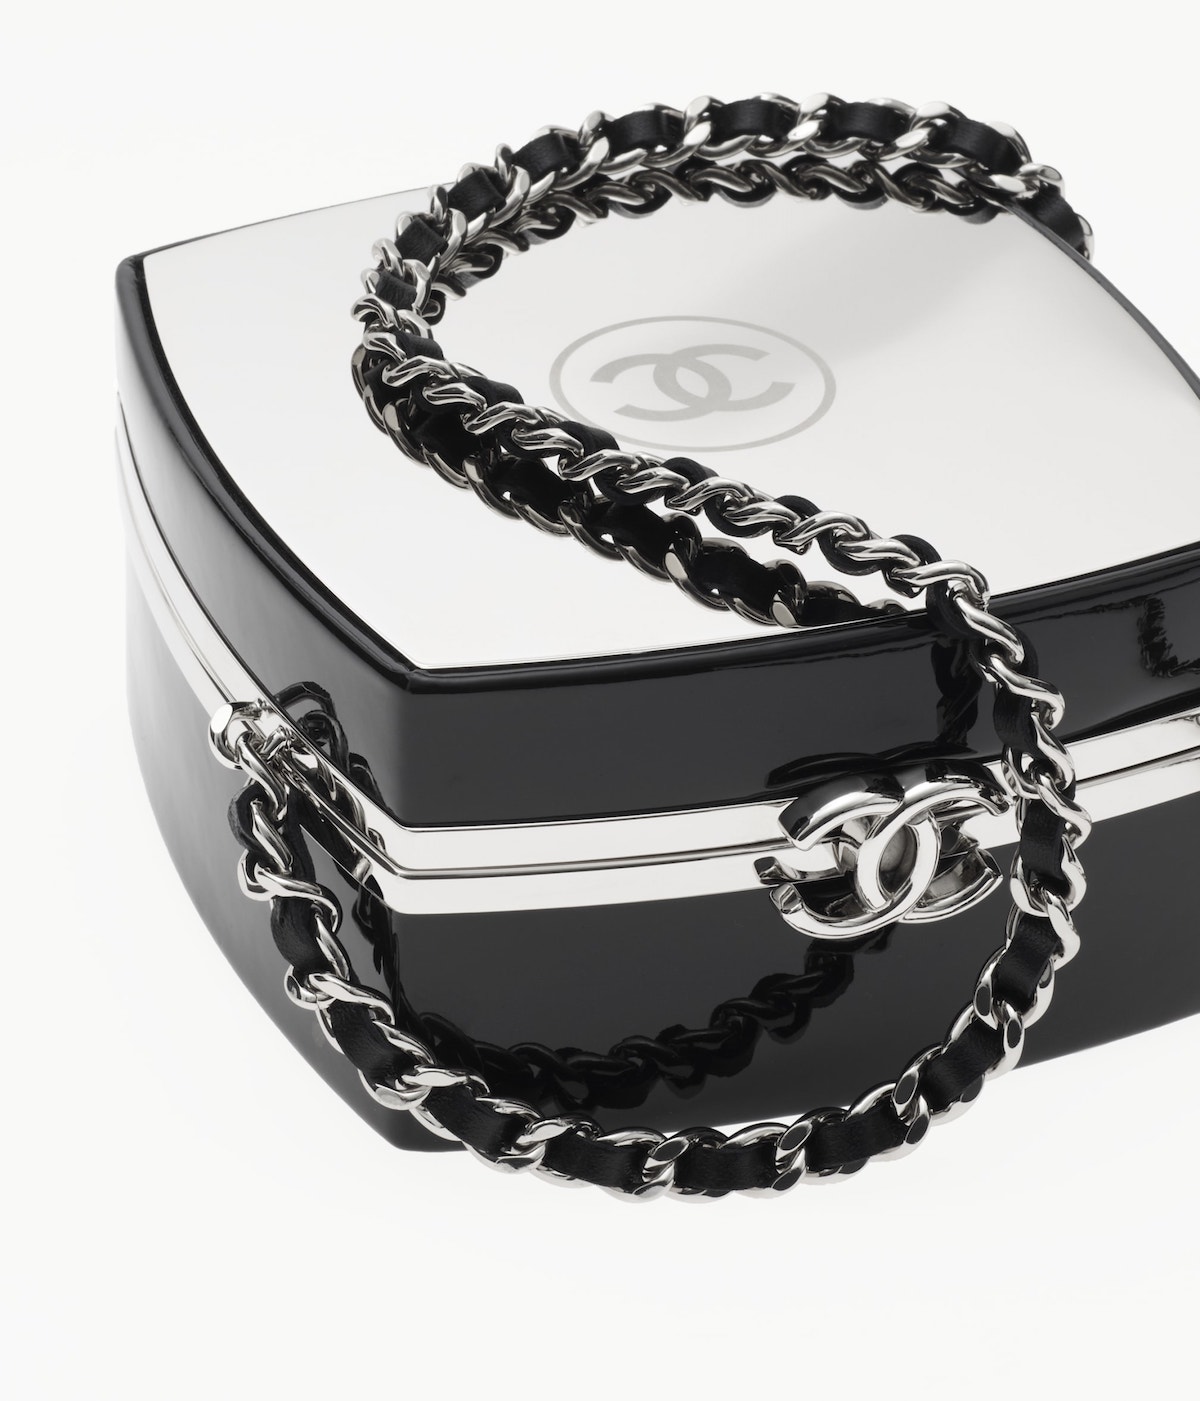 Chanel's Compact Powder Case Clutch With Chain - BagAddicts Anonymous